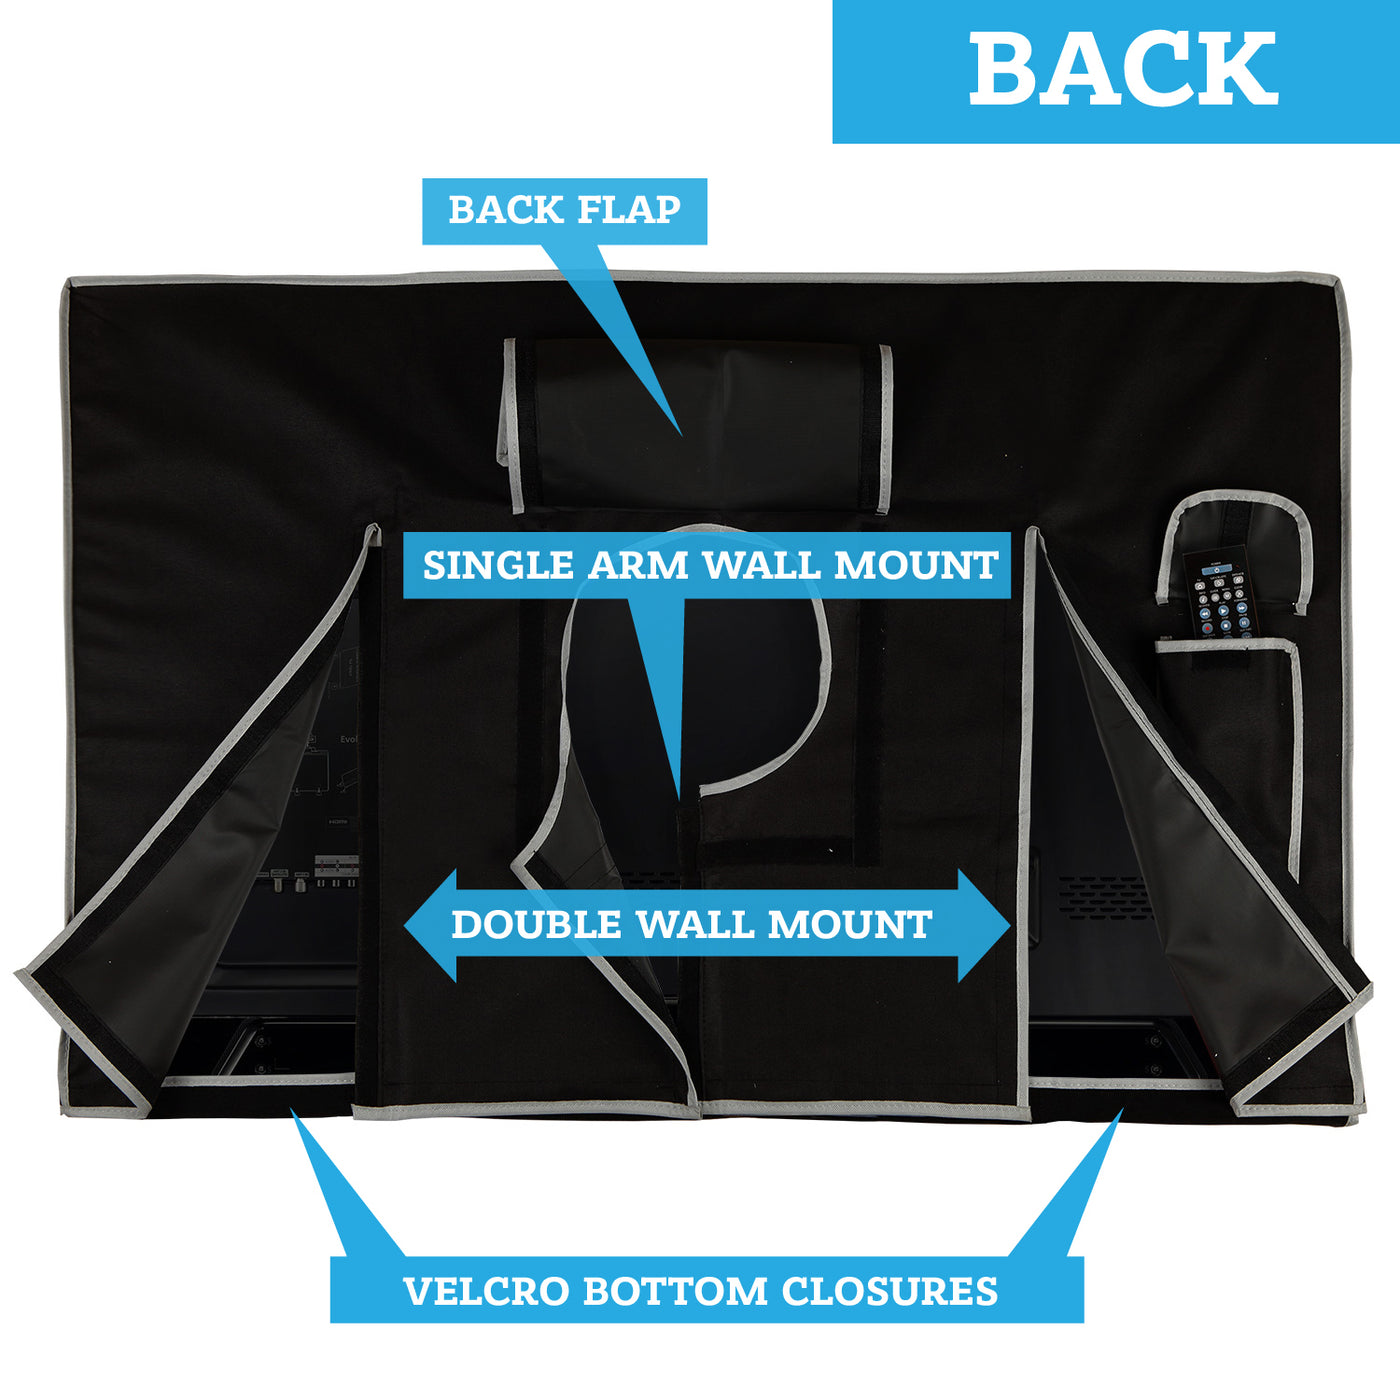 Black - Outdoor TV Cover